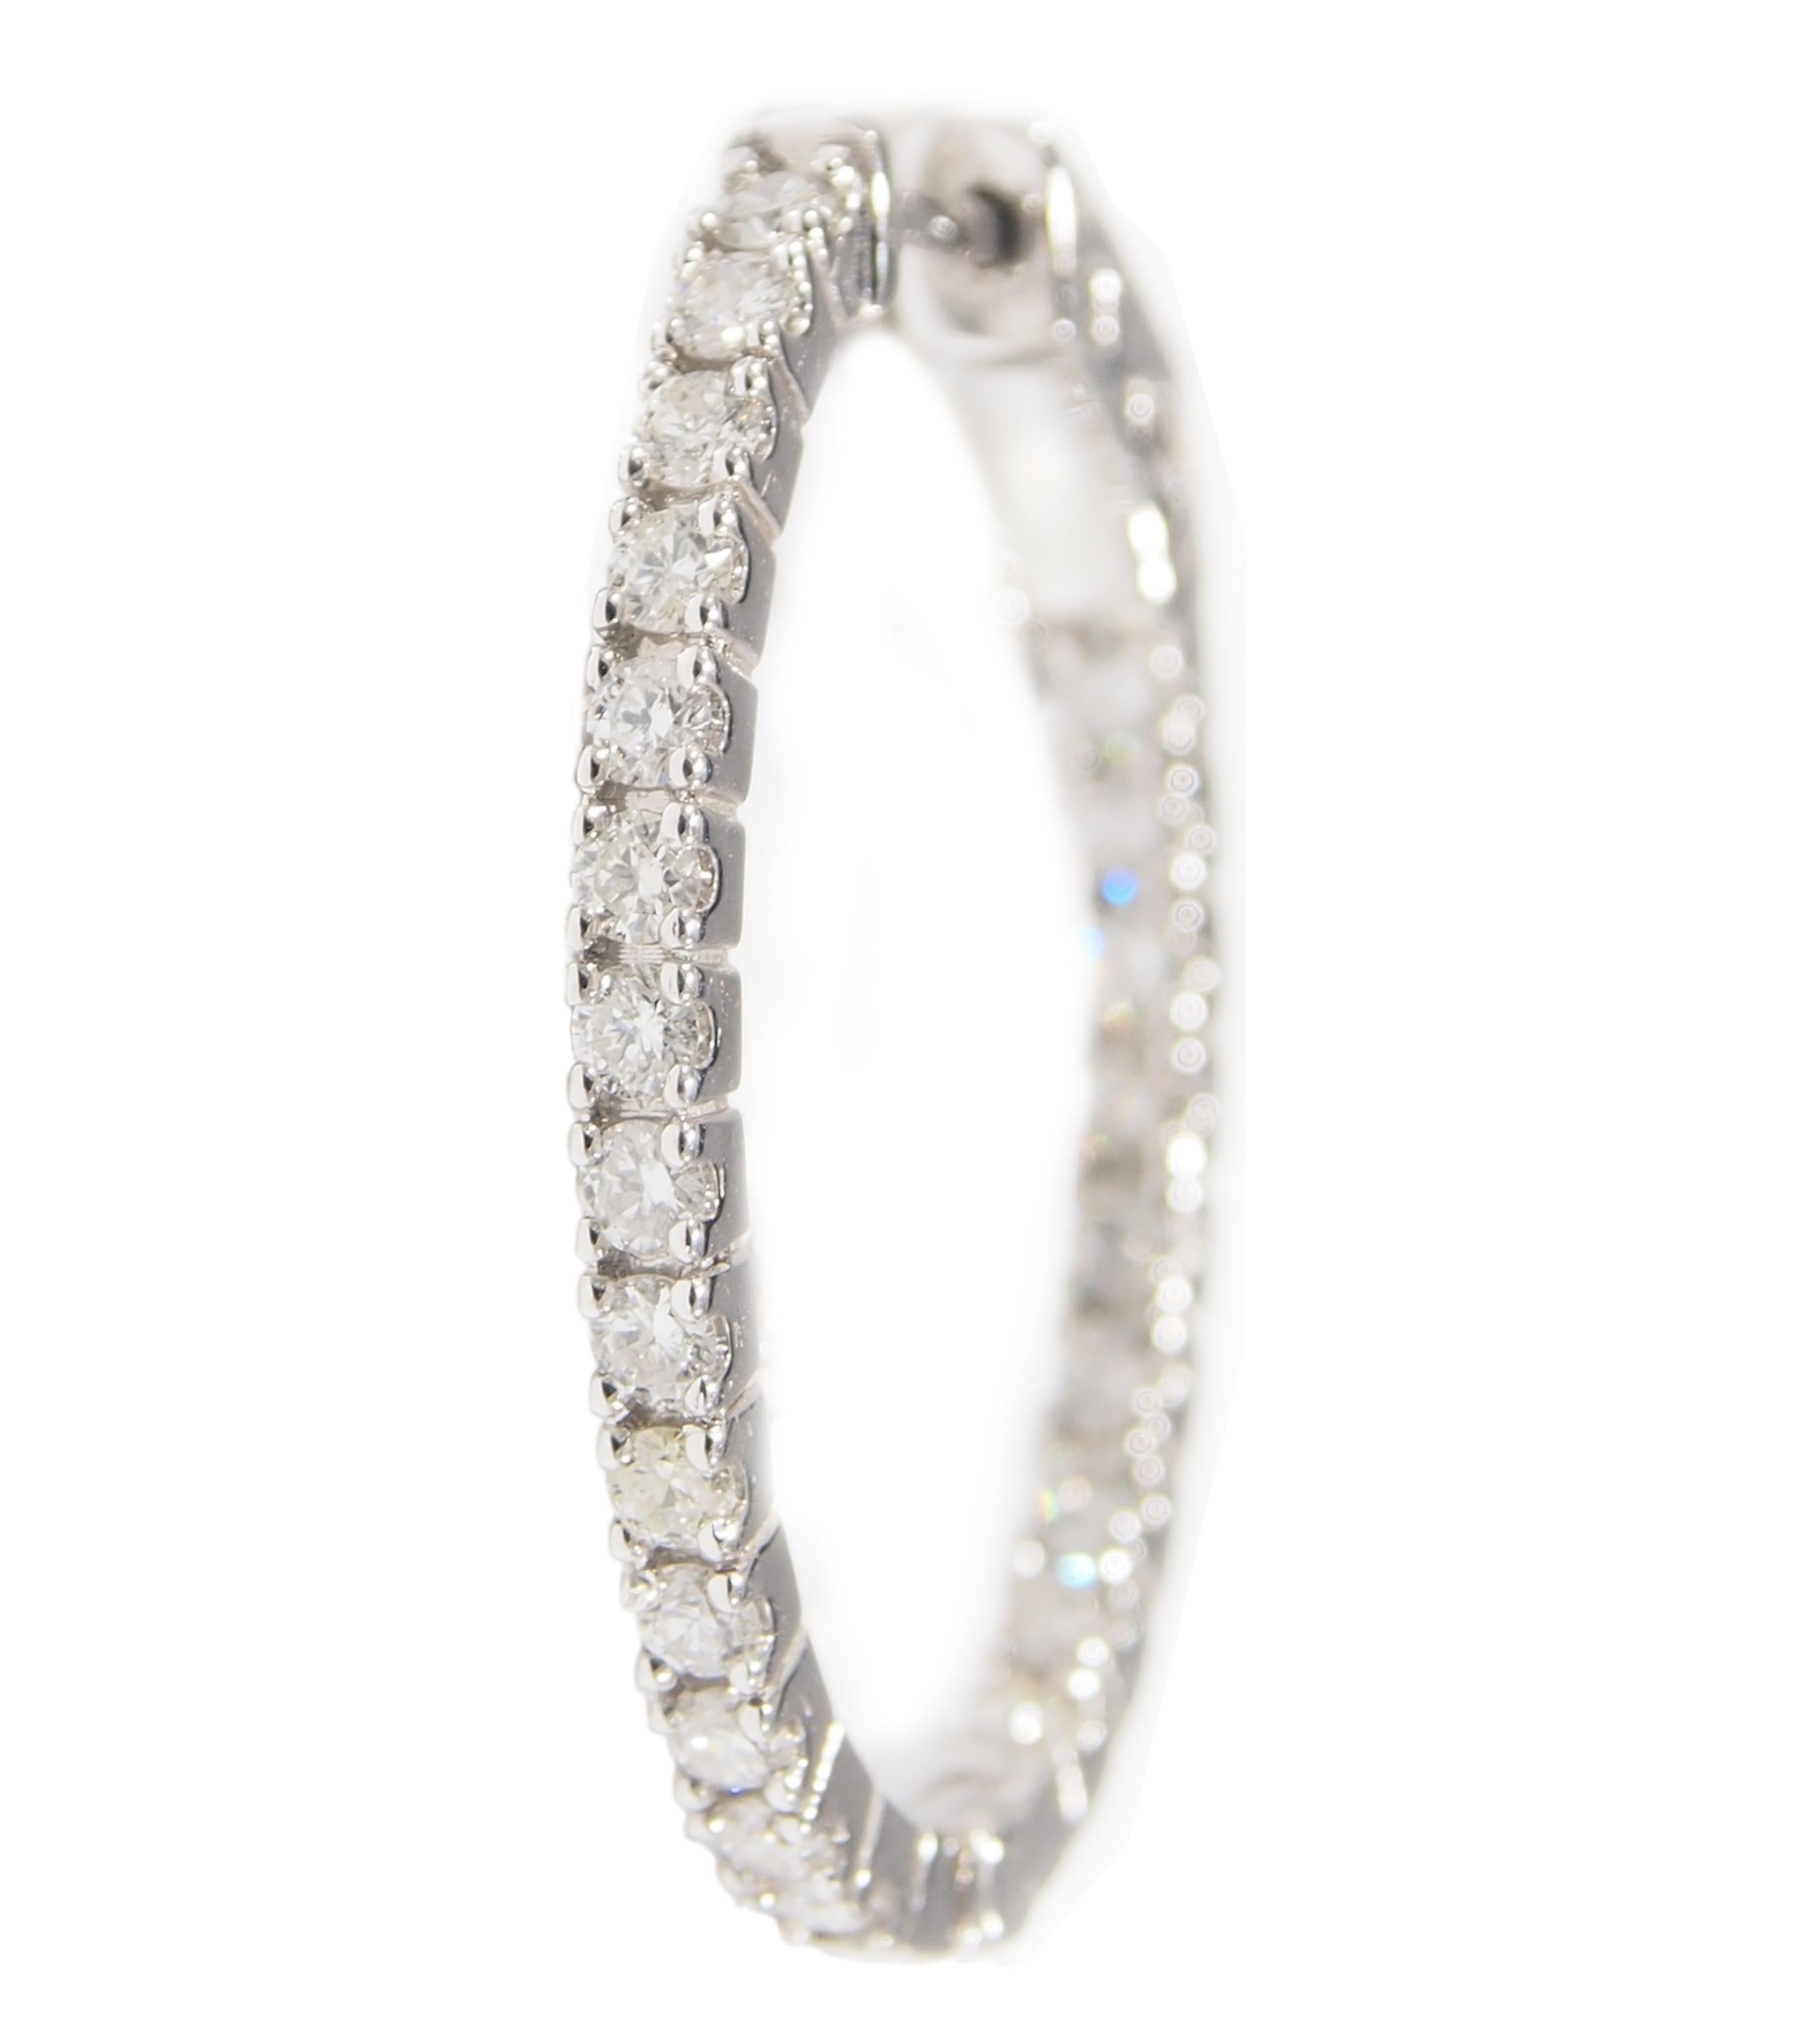 These are a classic pair of 14K White Gold Hoop Earrings fashioned in an Oval with the Diamonds in the desired 